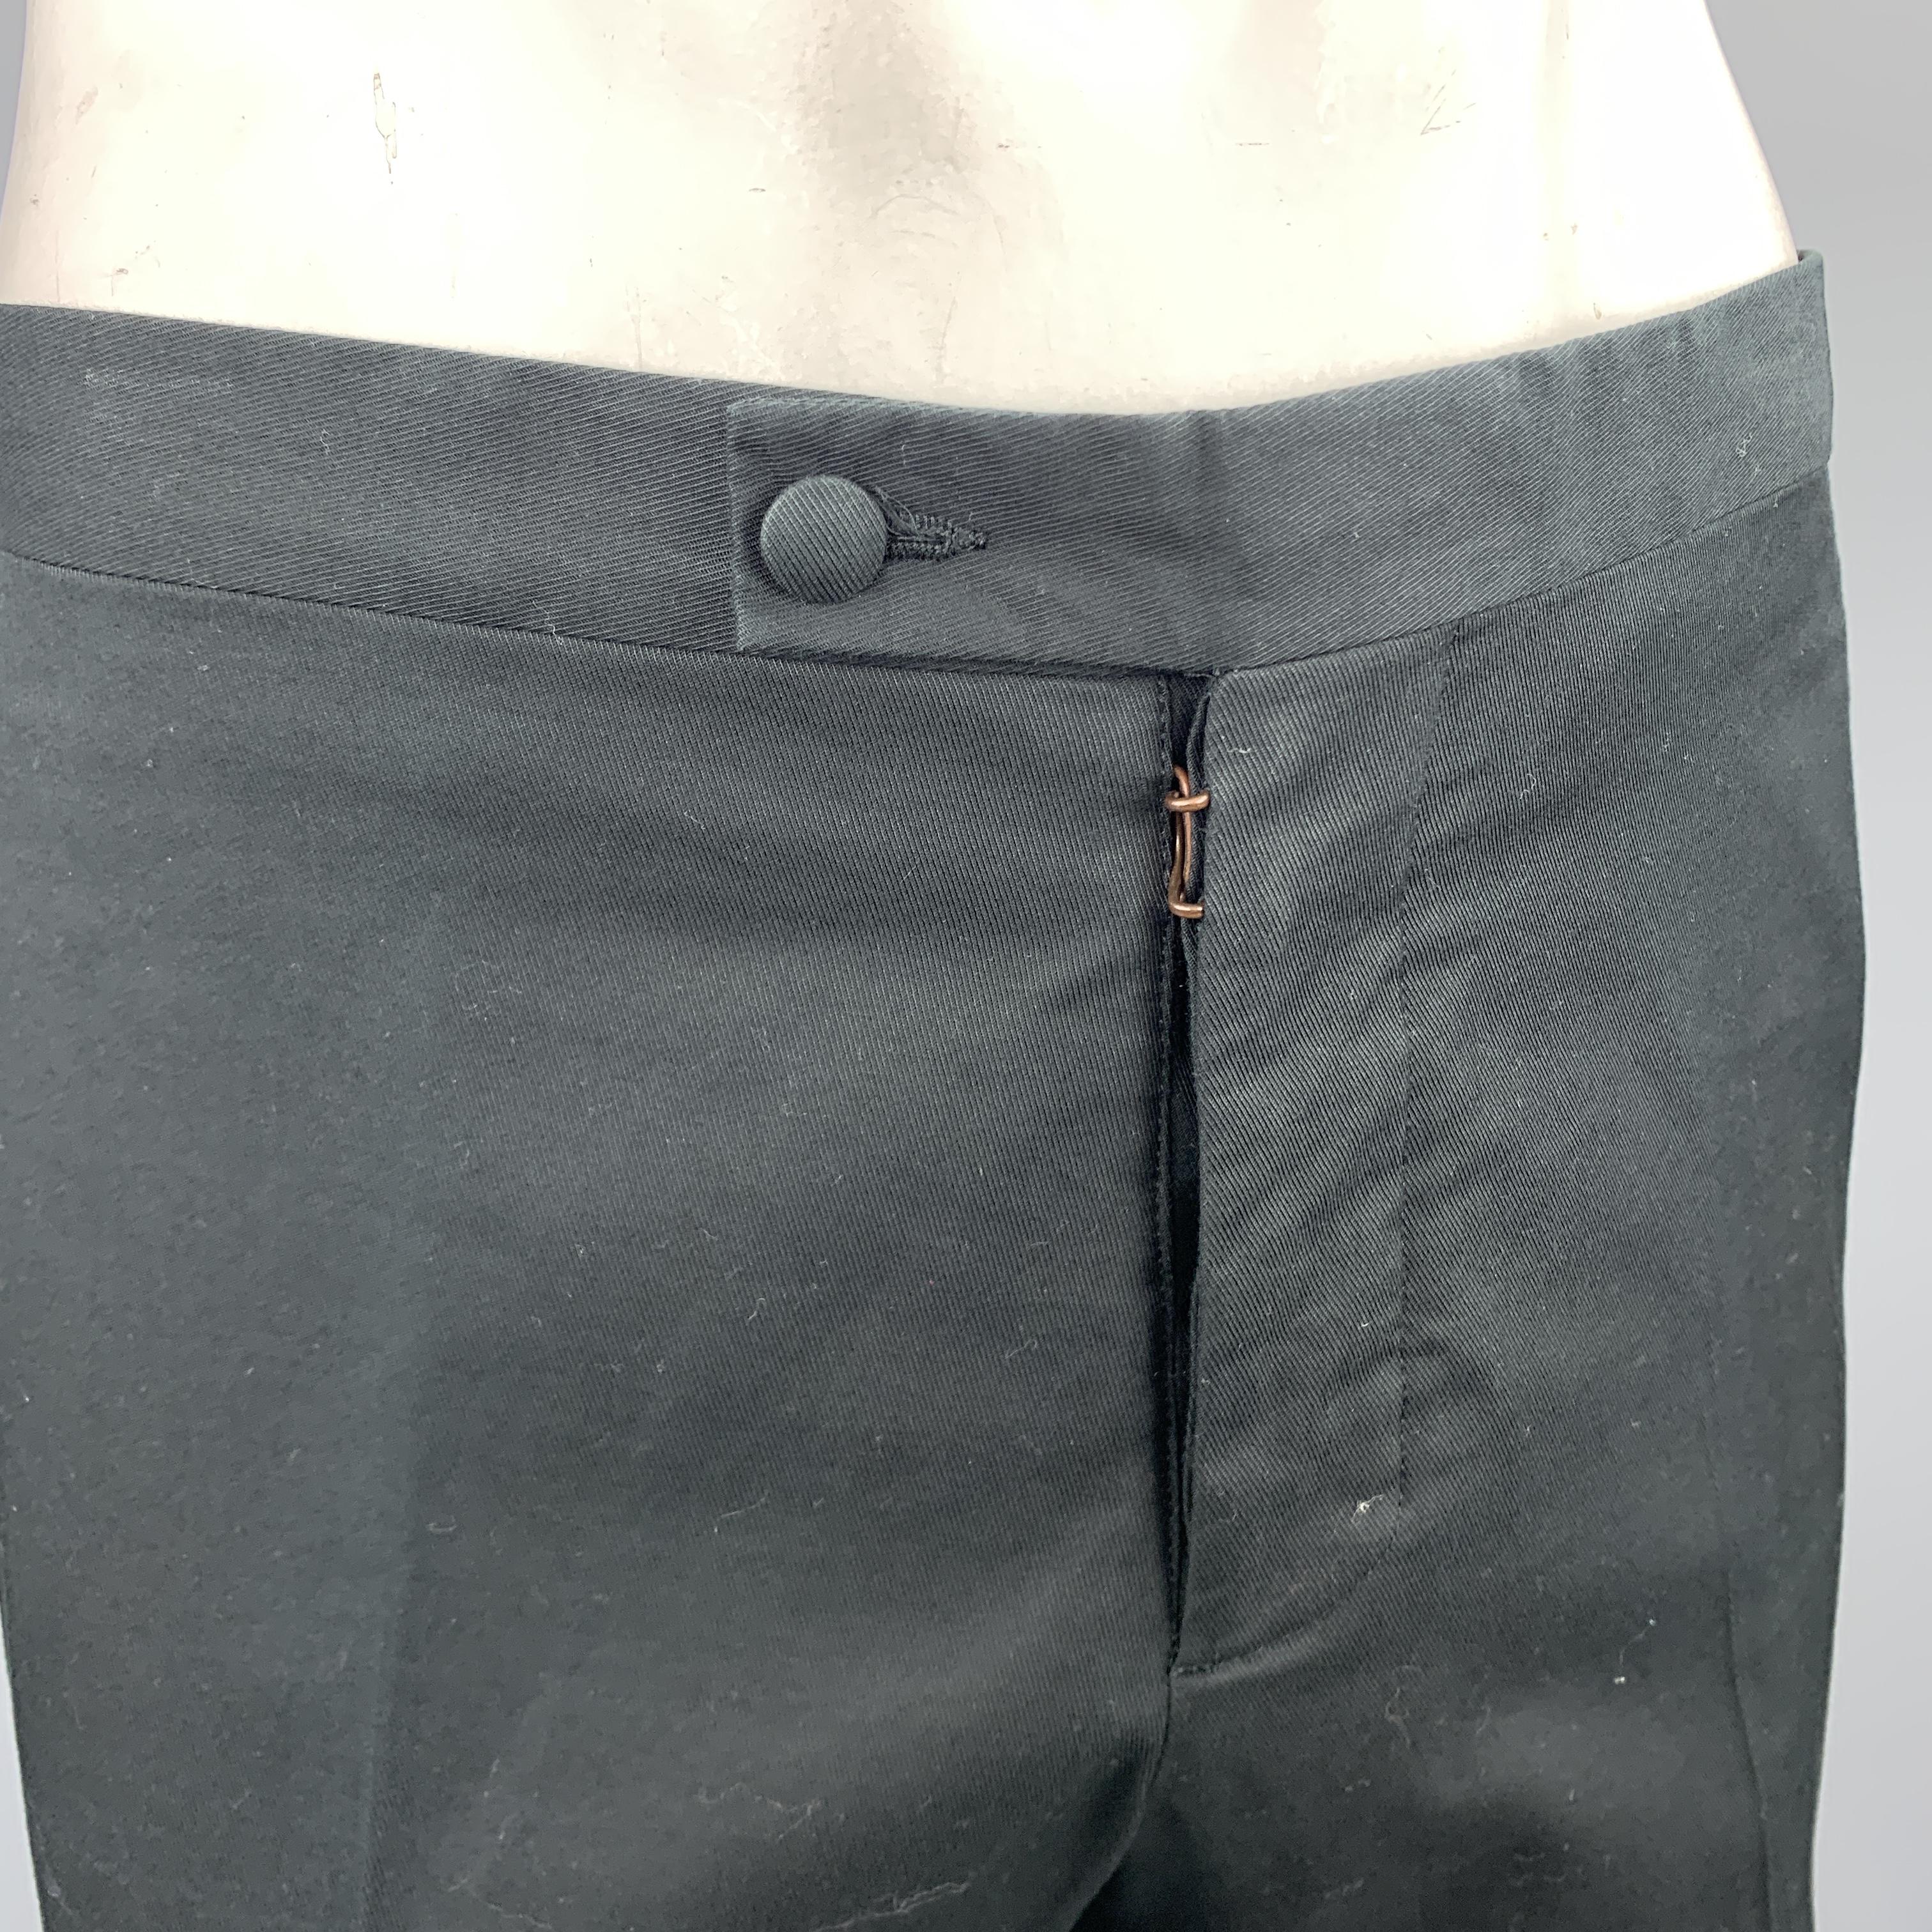 MAISON MARTIN MARGIELA flat front pants come in black woven cotton with a tab waistband and white side stripe. Made in Italy.

Excellent Pre-Owned Condition.
Marked: SLIM IT 52

Measurements:

Waist: 38 in.
Rise: 11 in.
Inseam: 35 in.